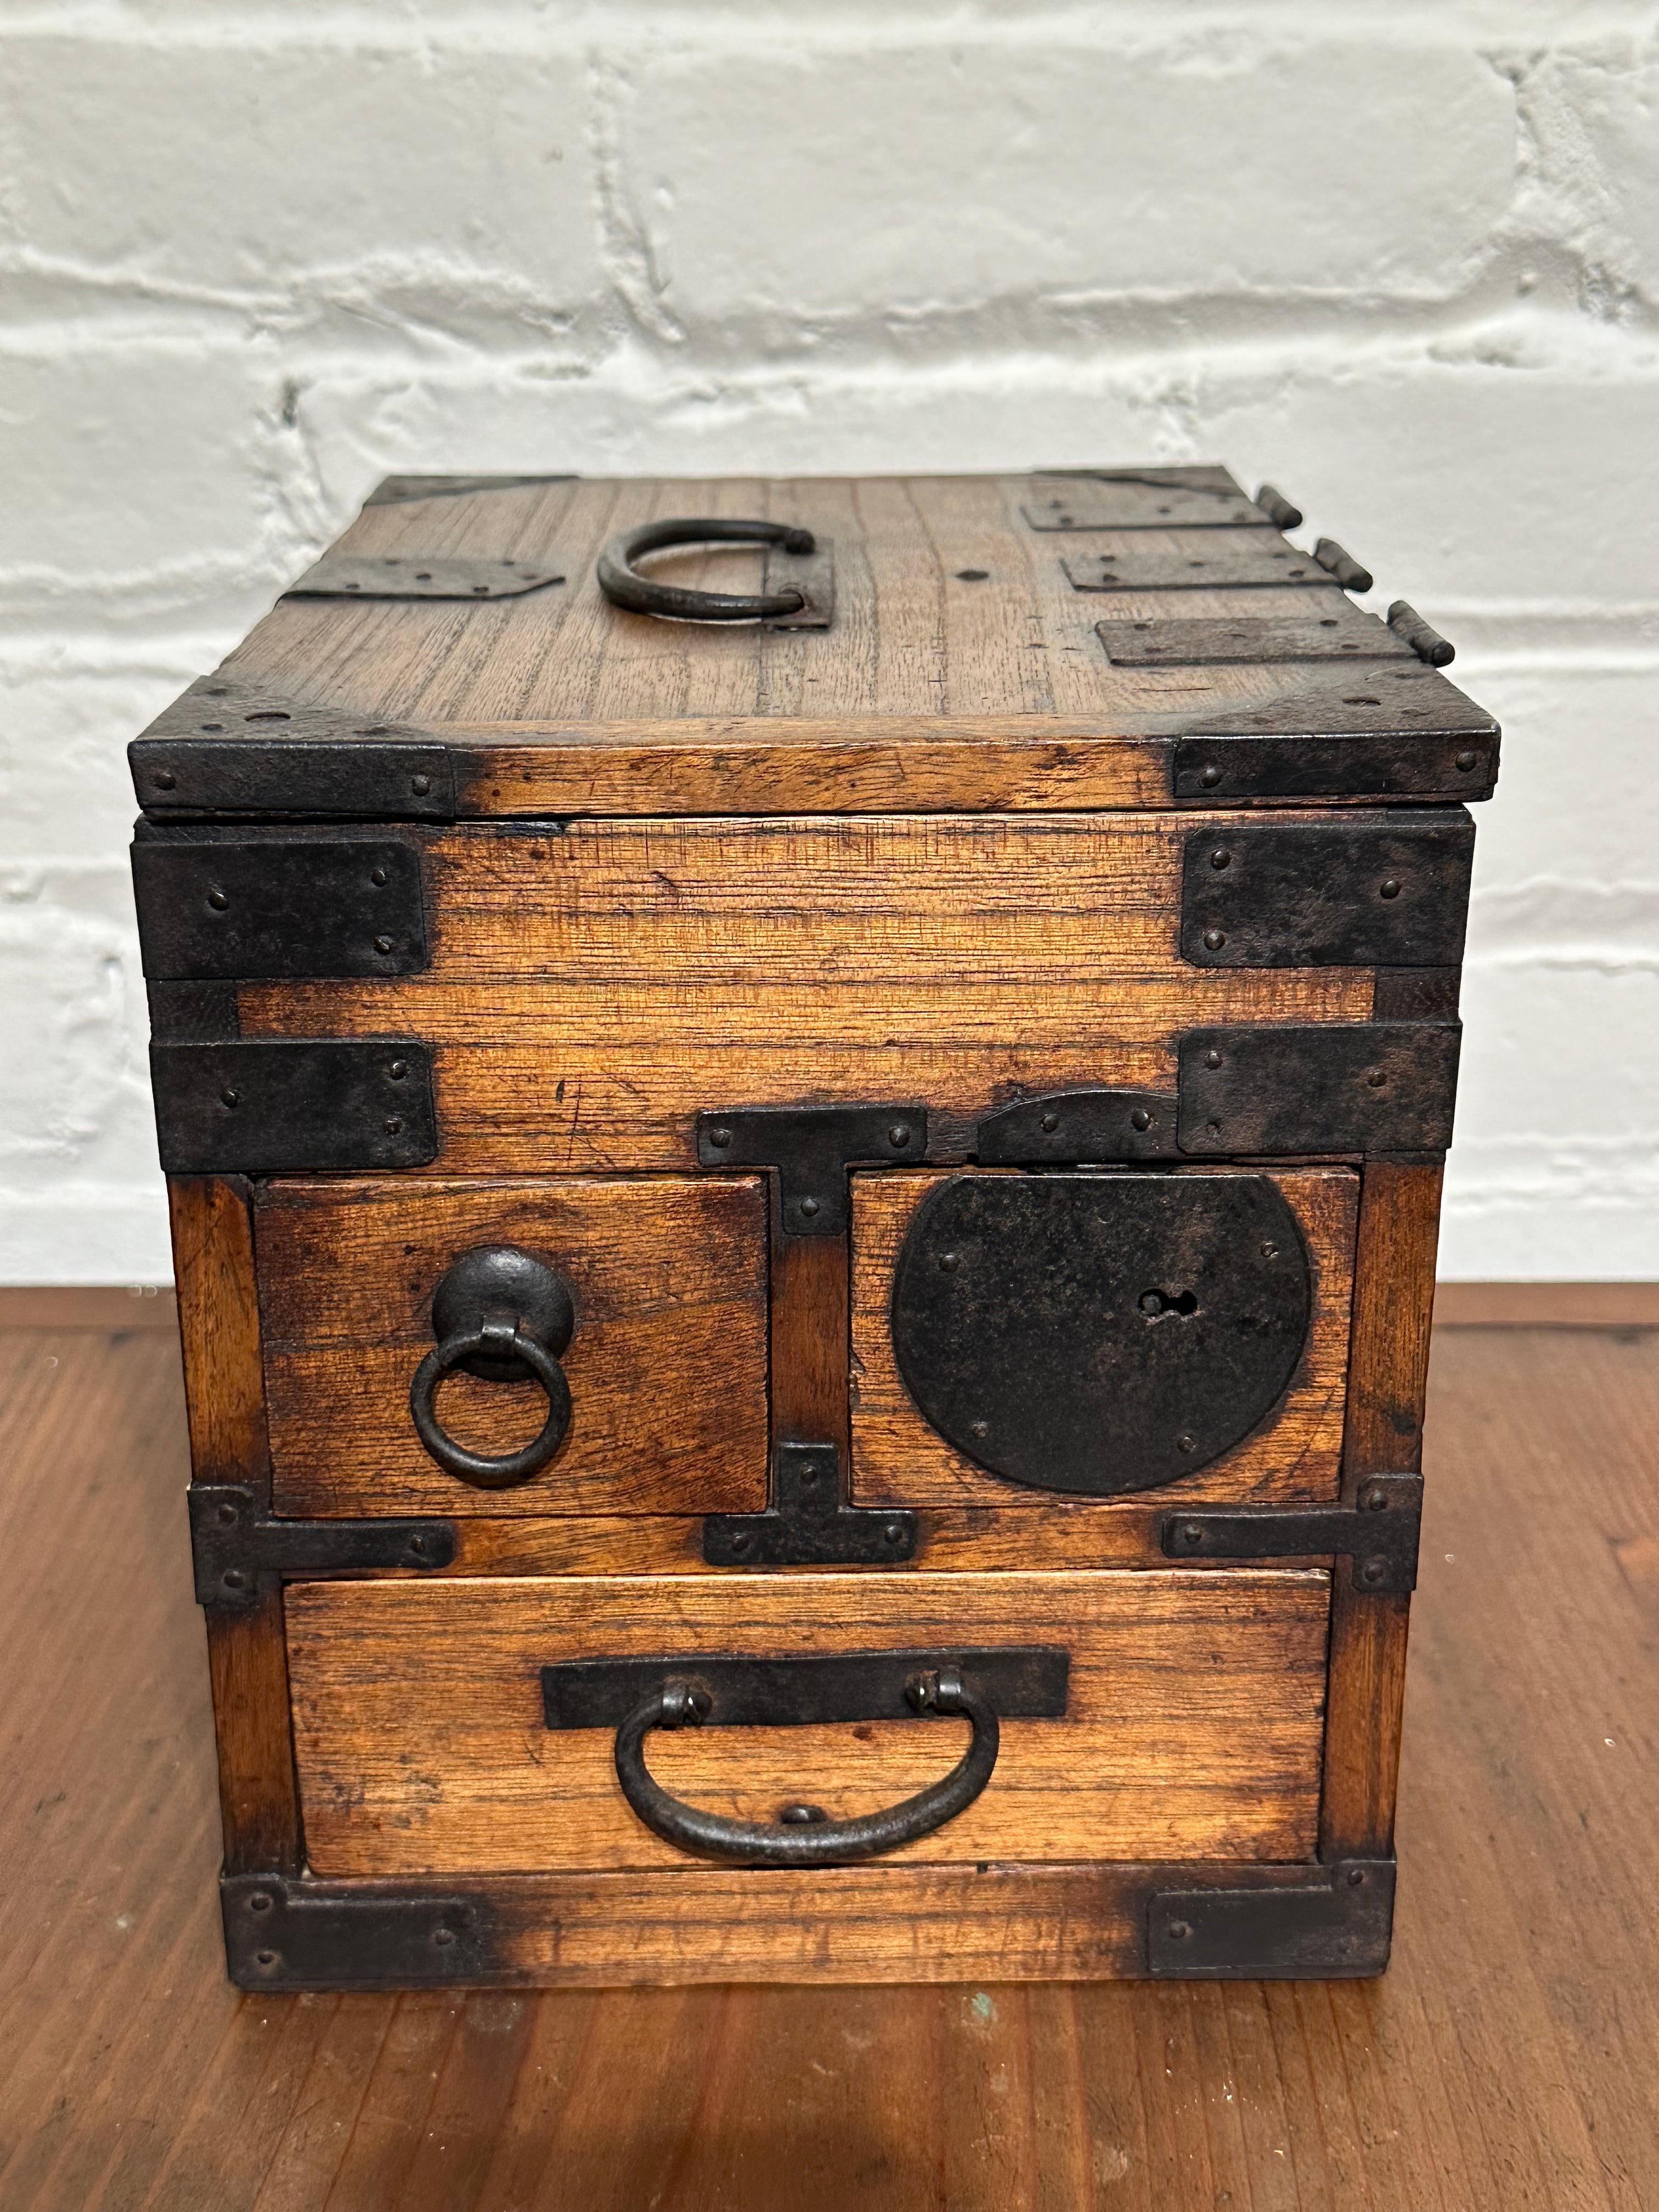 Available from Shogun's Gallery in Portland, Oregon for over 40 years specializing in Asian Arts & Antiques.

This is a 130 year old antique Japanese suzuribako from the late Meiji Era c. 1890. This suzuribako (portable calligraphy tansu) has three